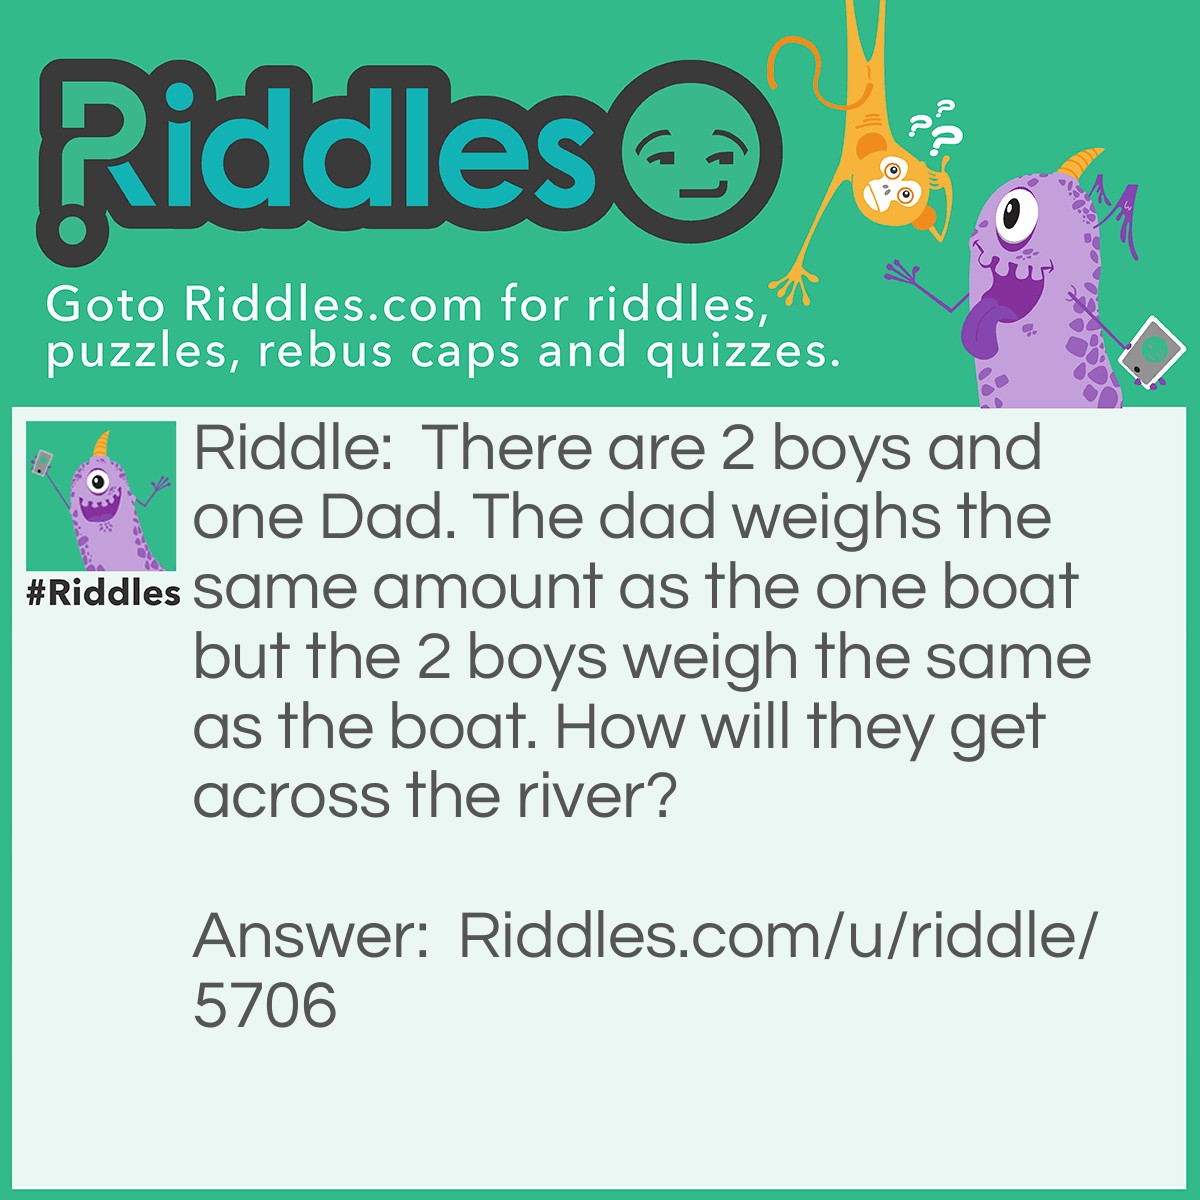 Riddle: There are 2 boys and one Dad. The dad weighs the same amount as the one boat but the 2 boys weigh the same as the boat. How will they get across the river? Answer: The Dad will go over with the boy. Then the boy will go back and get the boy and then they will be all in the one same new place.